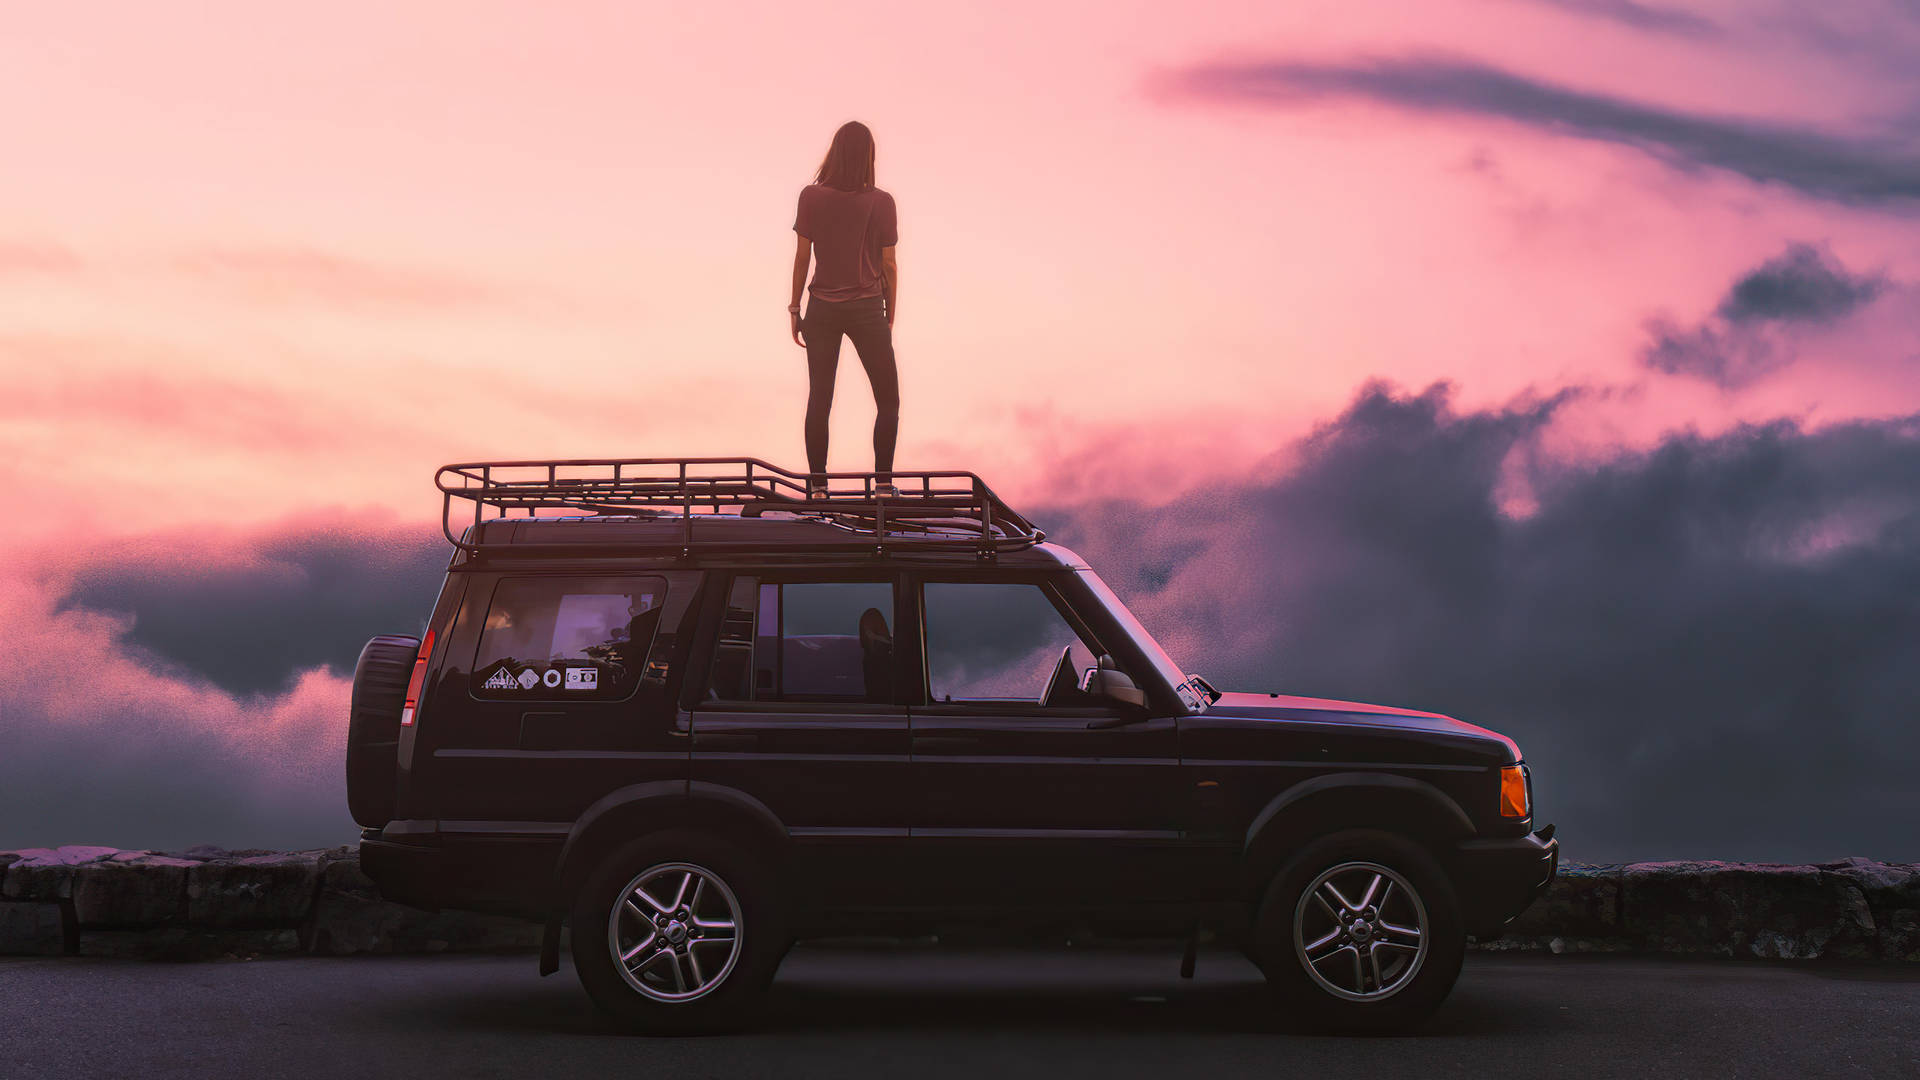 Aesthetic 4K Car With Woman On Top Wallpaper